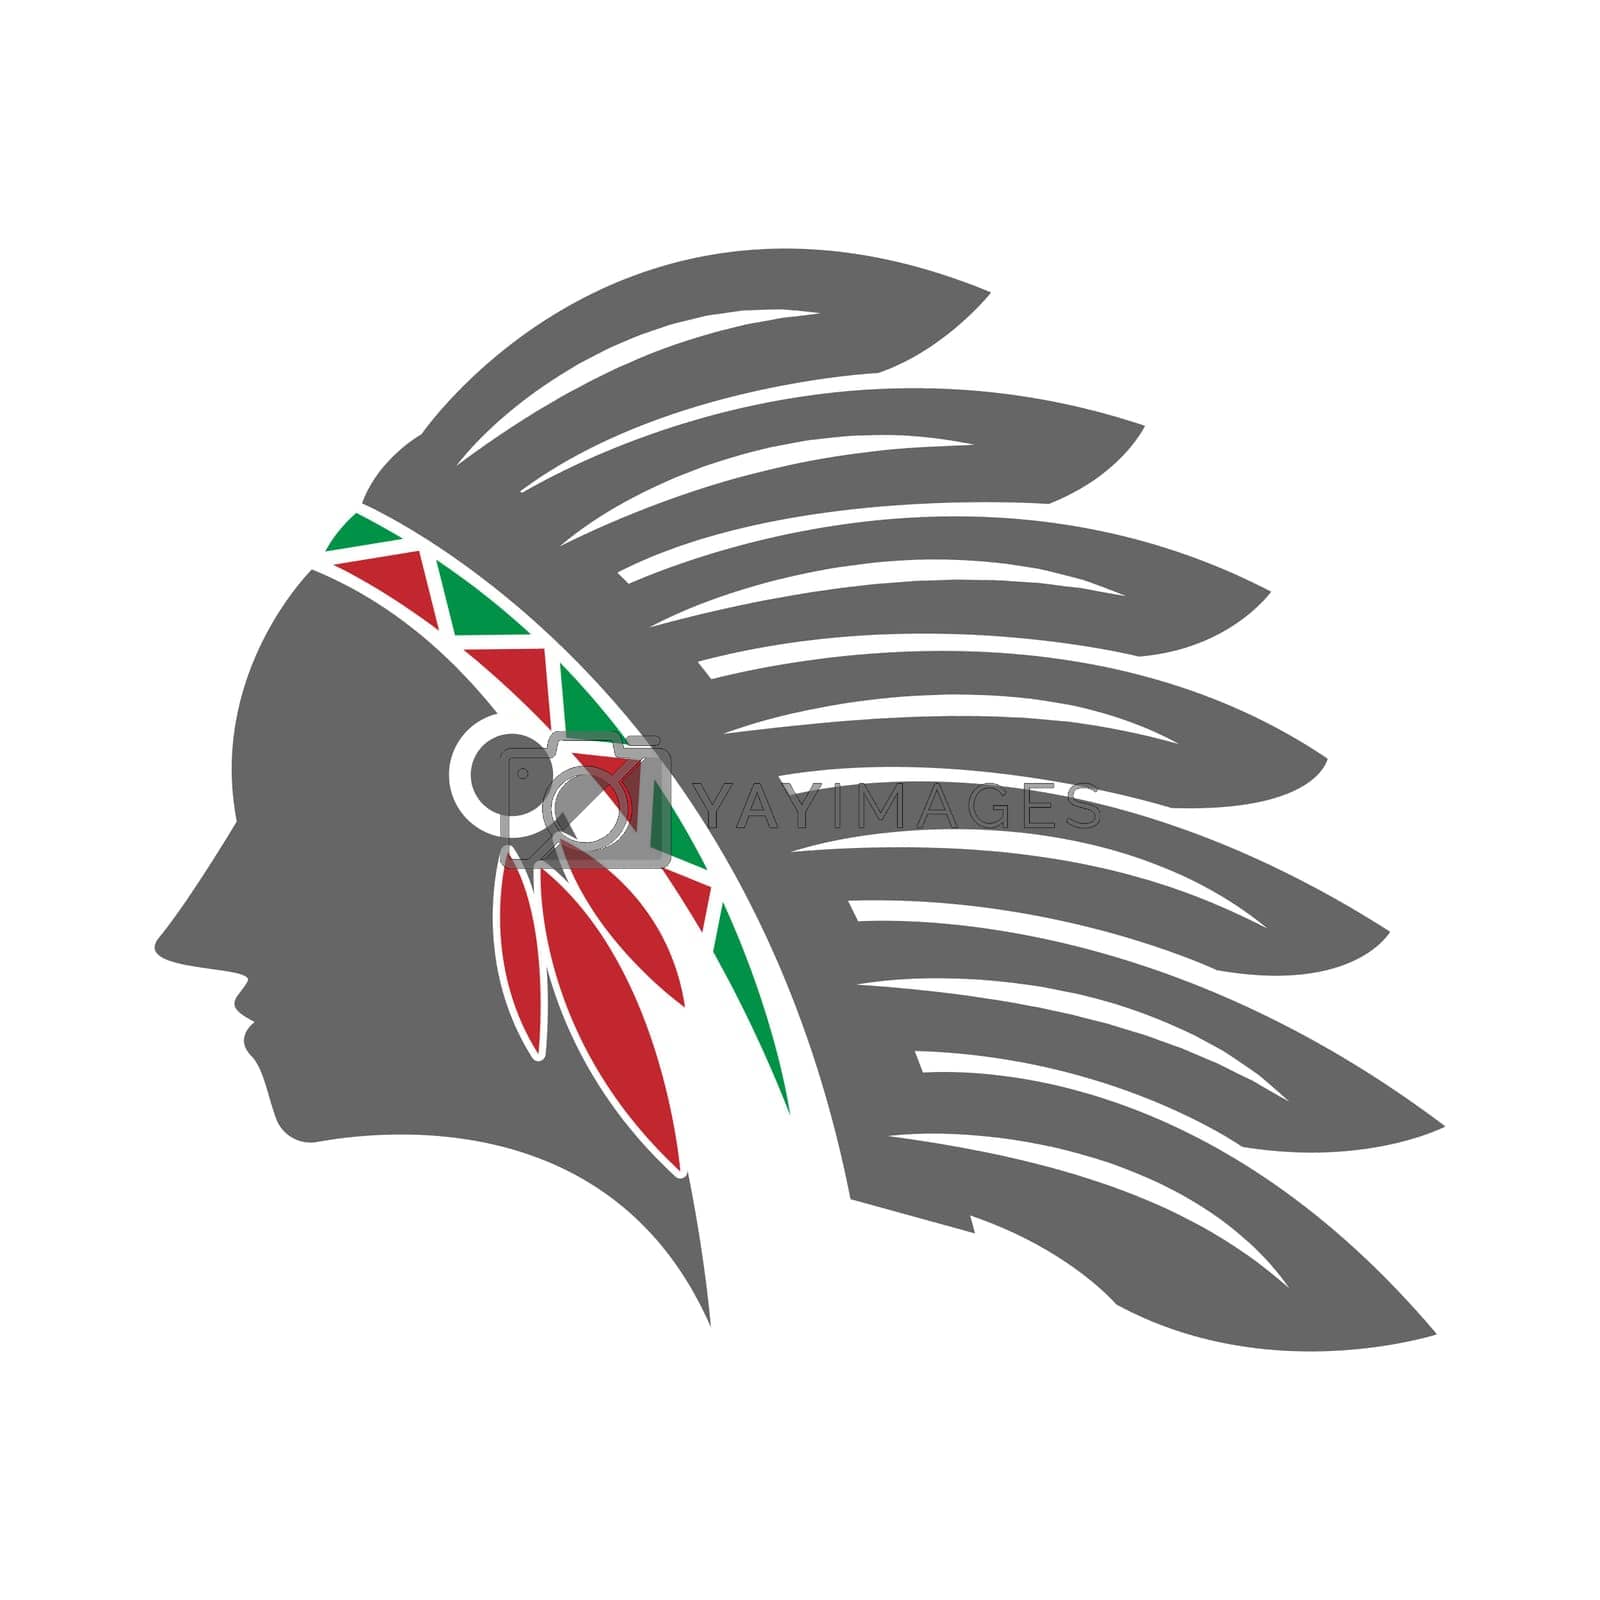 Royalty free image of Native American icon logo design by bellaxbudhong3